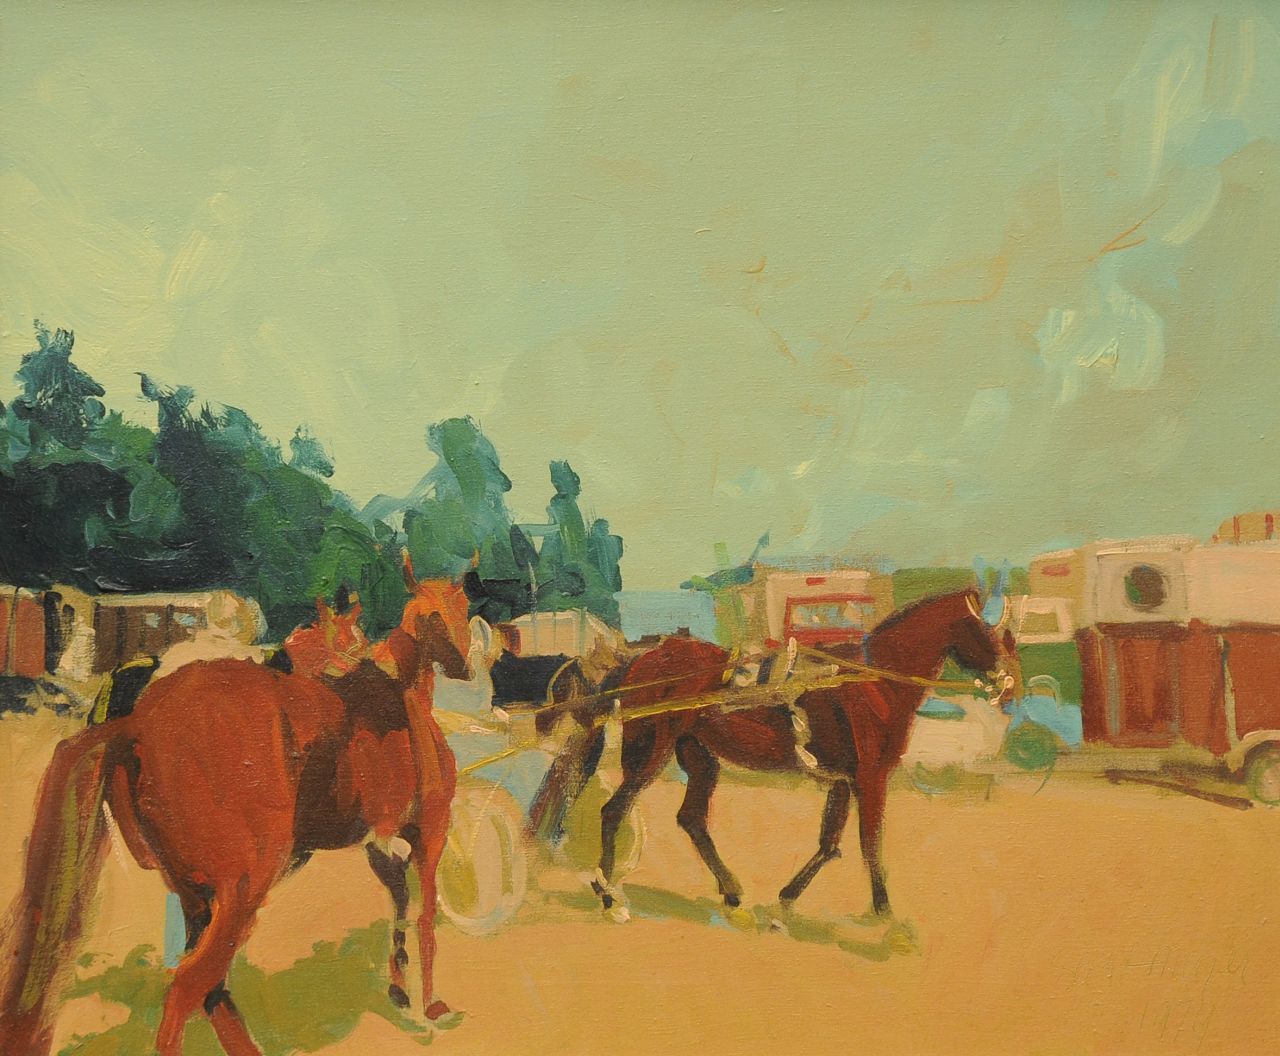 Meyer G.  | Geert Meyer, At the racetrack, oil on canvas 50.4 x 60.4 cm, signed l.r. and dated 1979